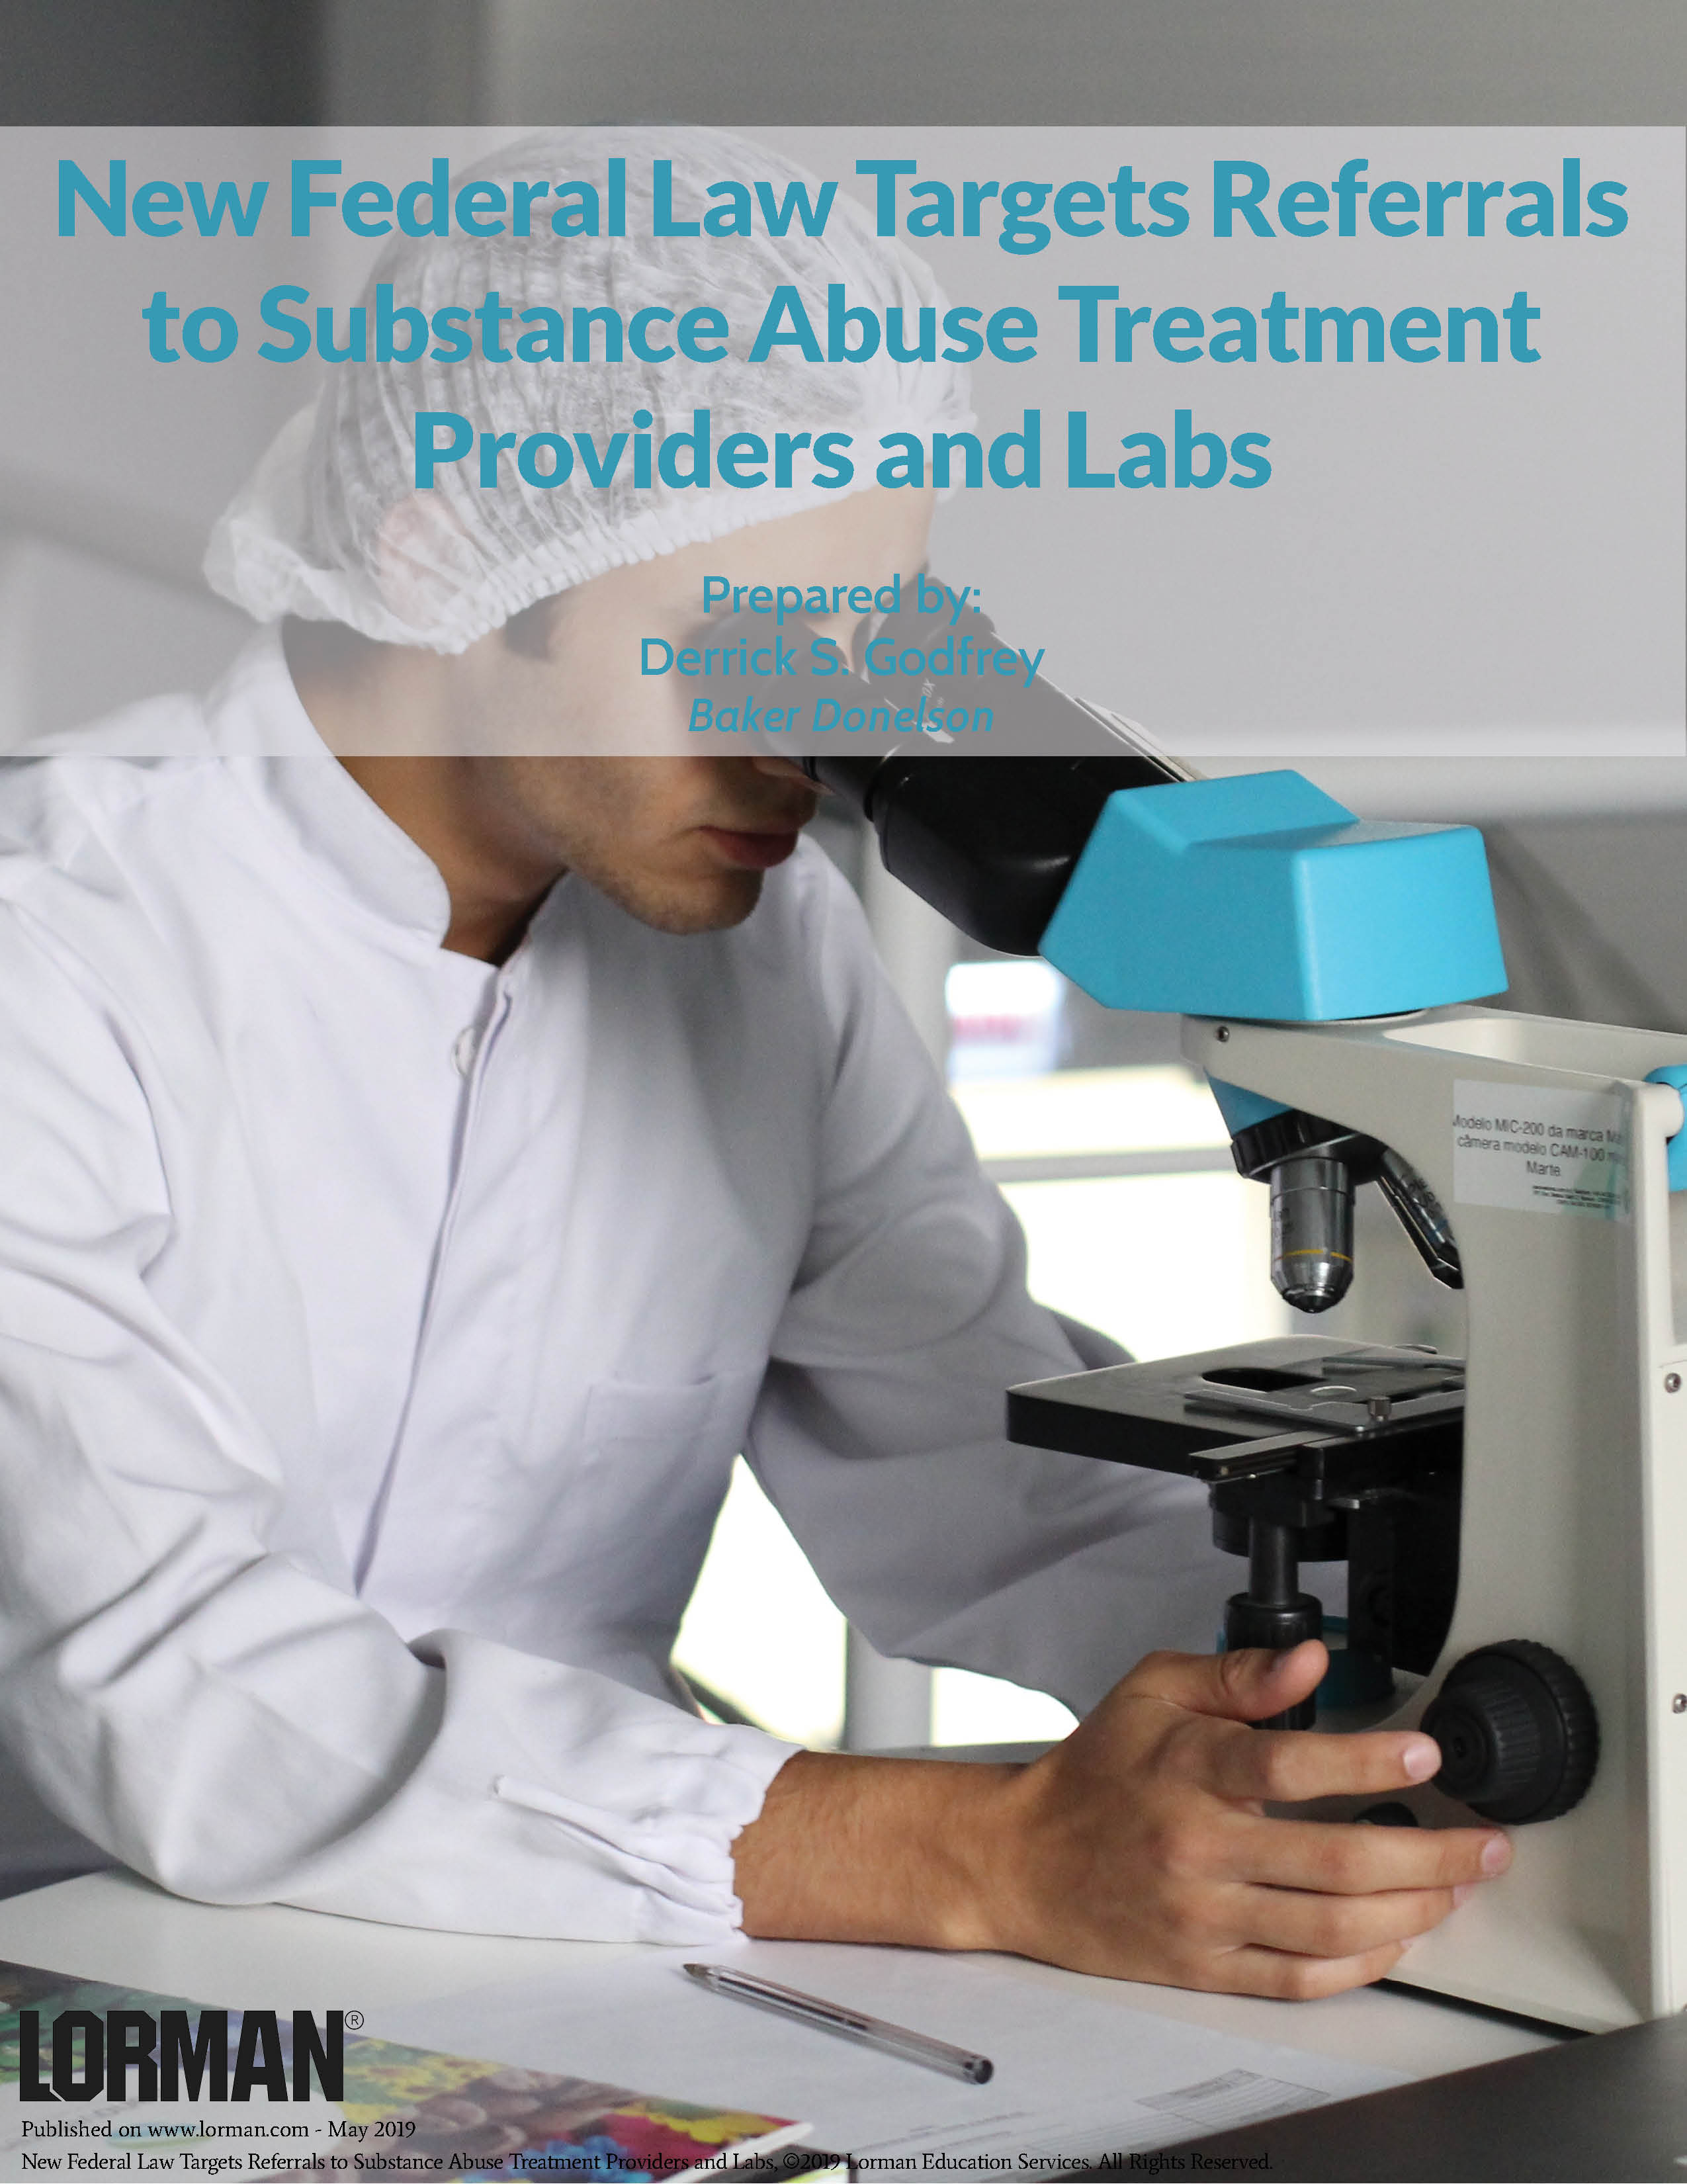 New Federal Law Targets Referrals to Substance Abuse Treatment Providers and Labs